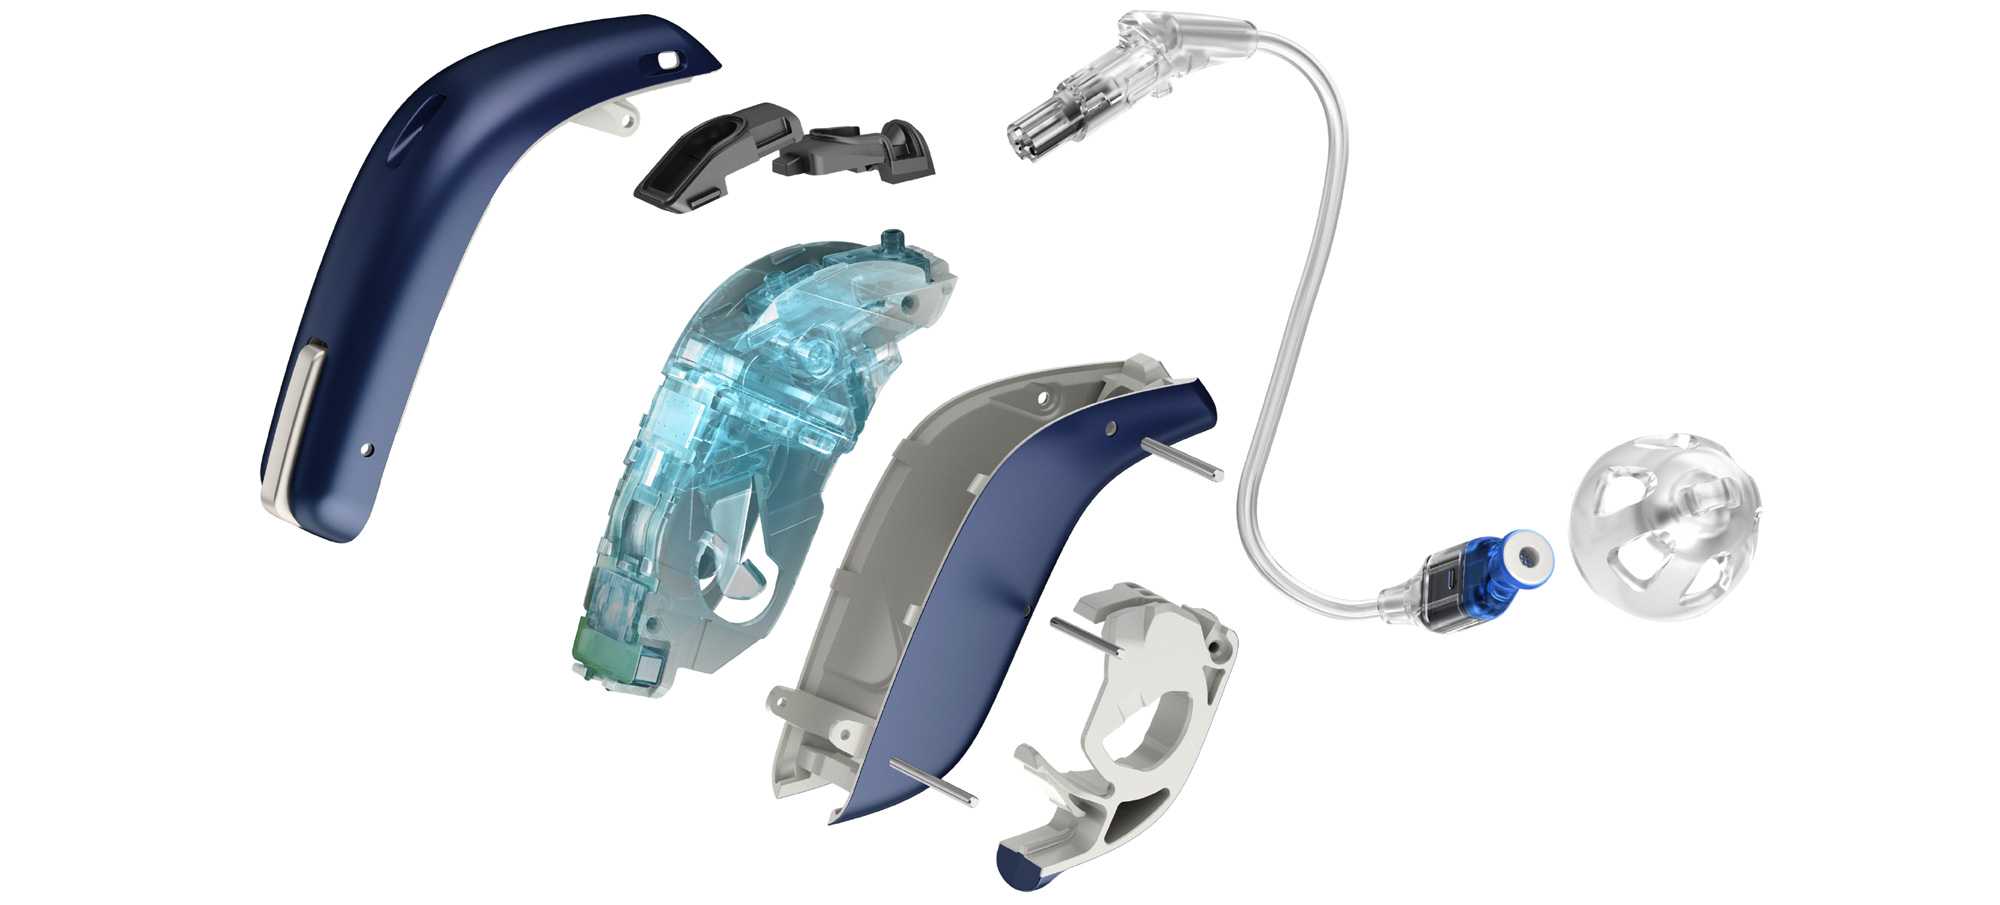 Hearing aid components